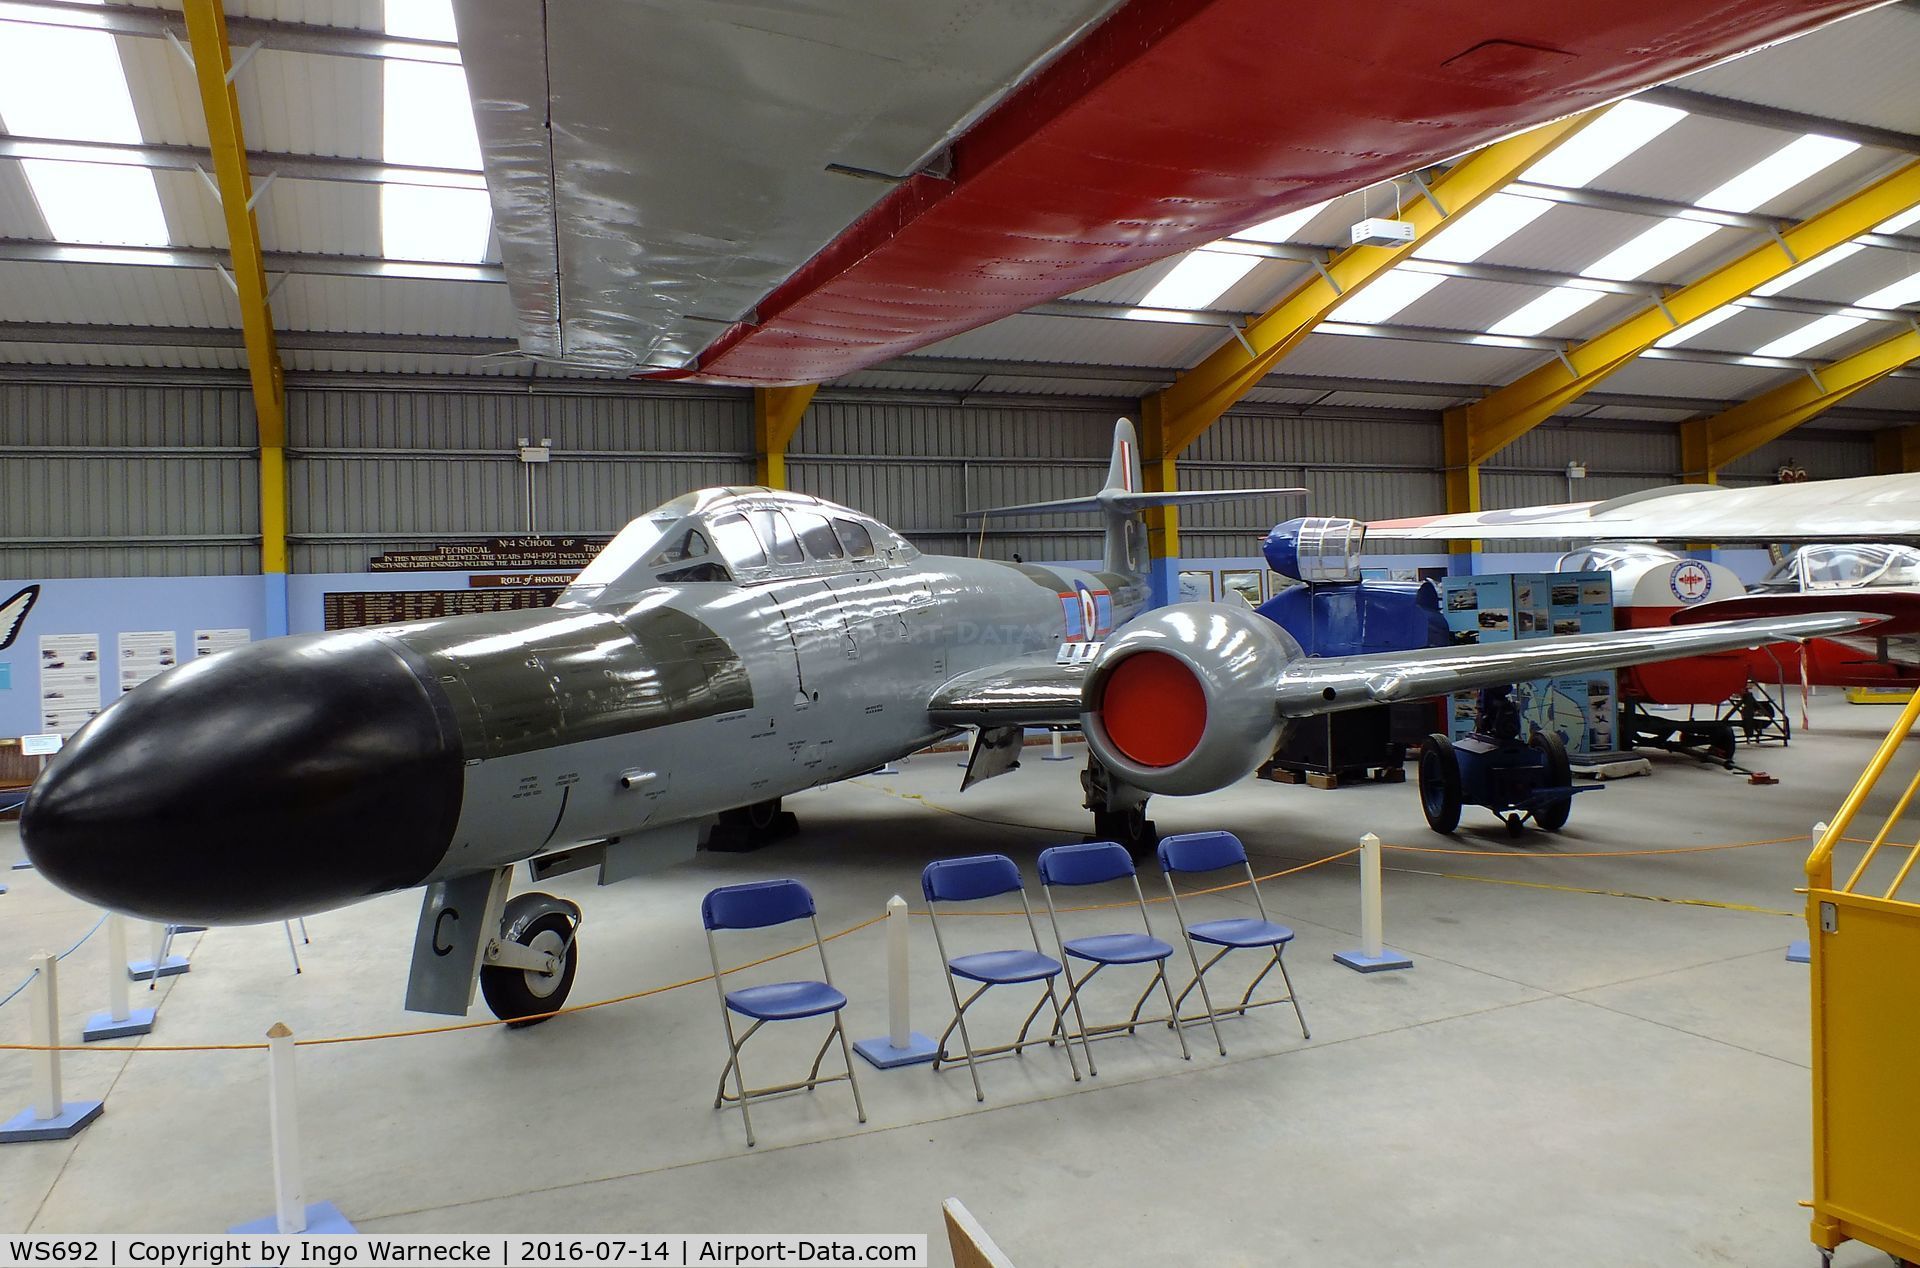 WS692, Gloster Meteor NF.12 C/N Not found WS692, Gloster Meteor NF12 at the Newark Air Museum